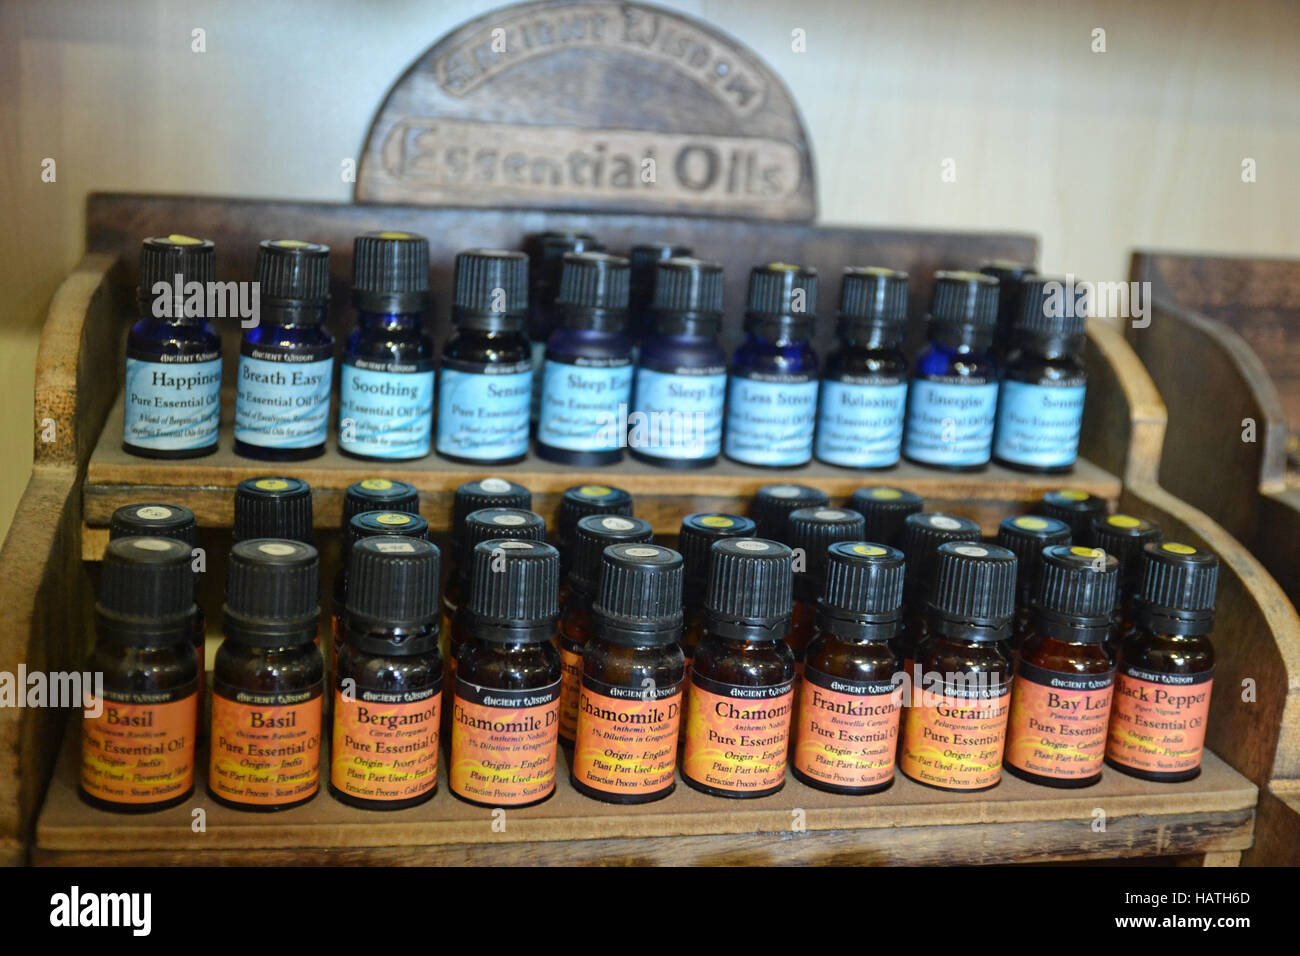 Ancient Wisdom essential oils, bottled and on a display rack in a spiritual shop in the UK Stock Photo